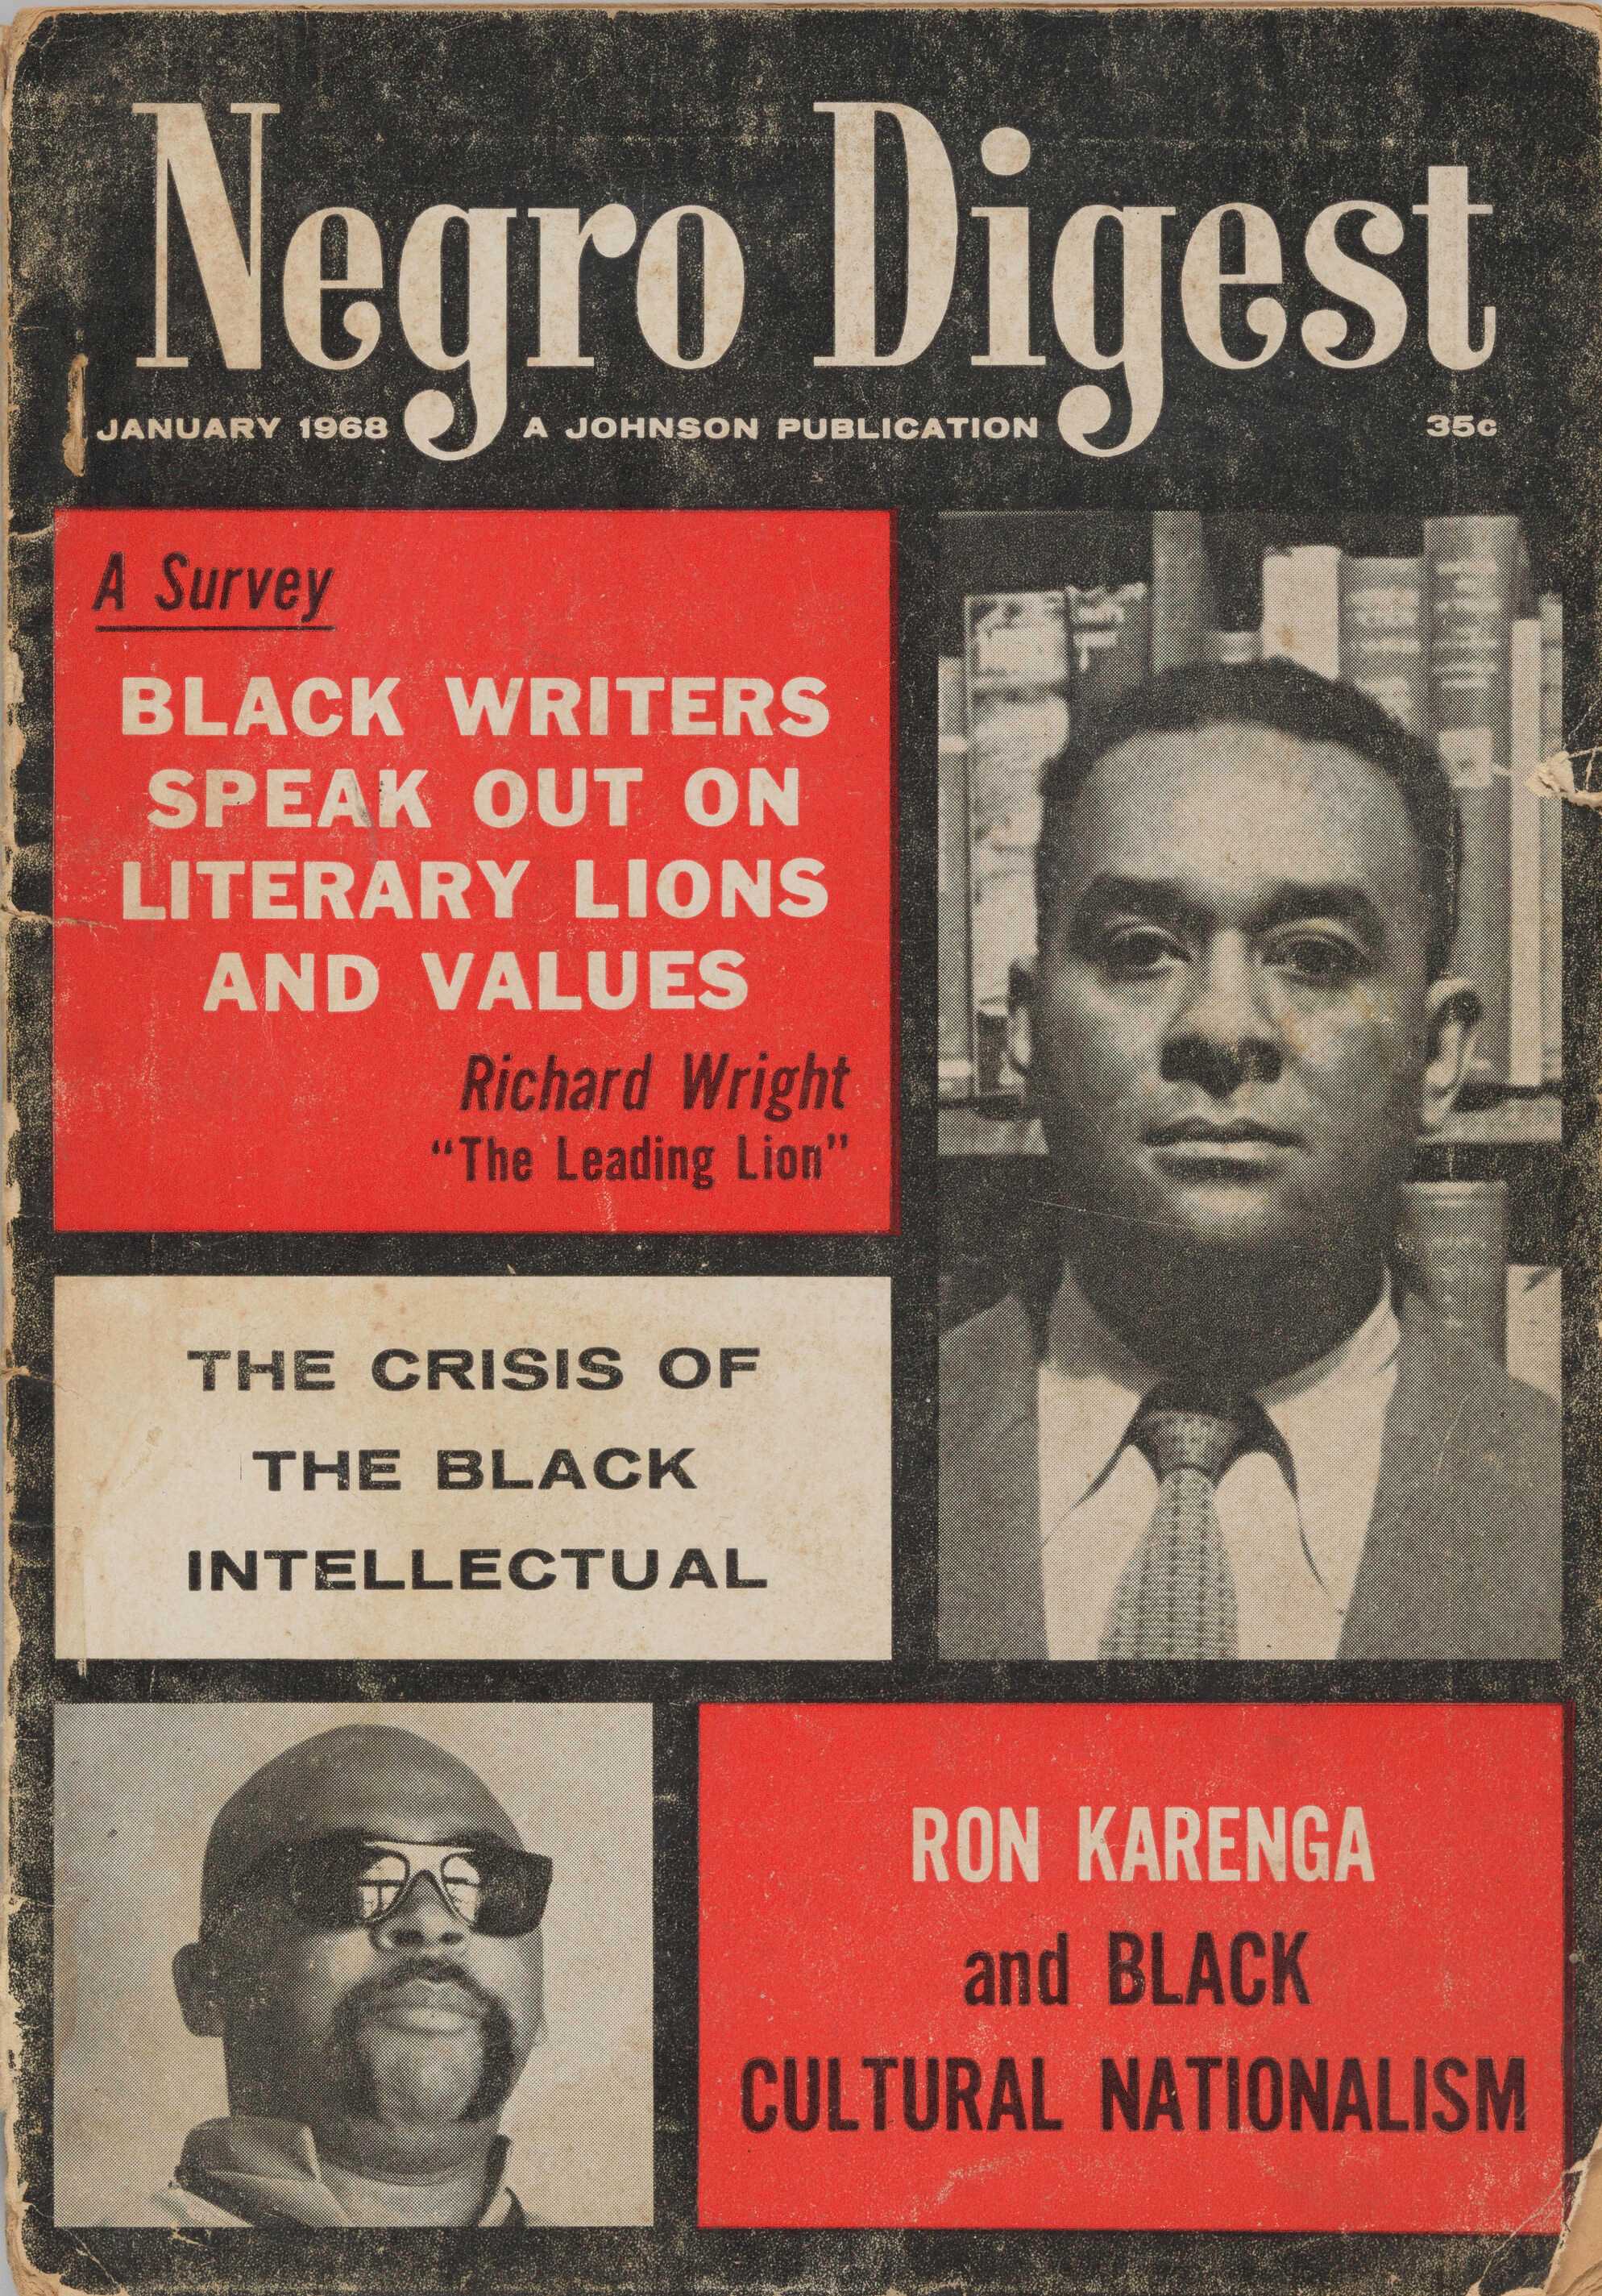 Publication of "Negro Digest" featuring two (2) black and white images, one of Richard Wright on the right side, middle, and one of Ron Karenga in the lower left corner.